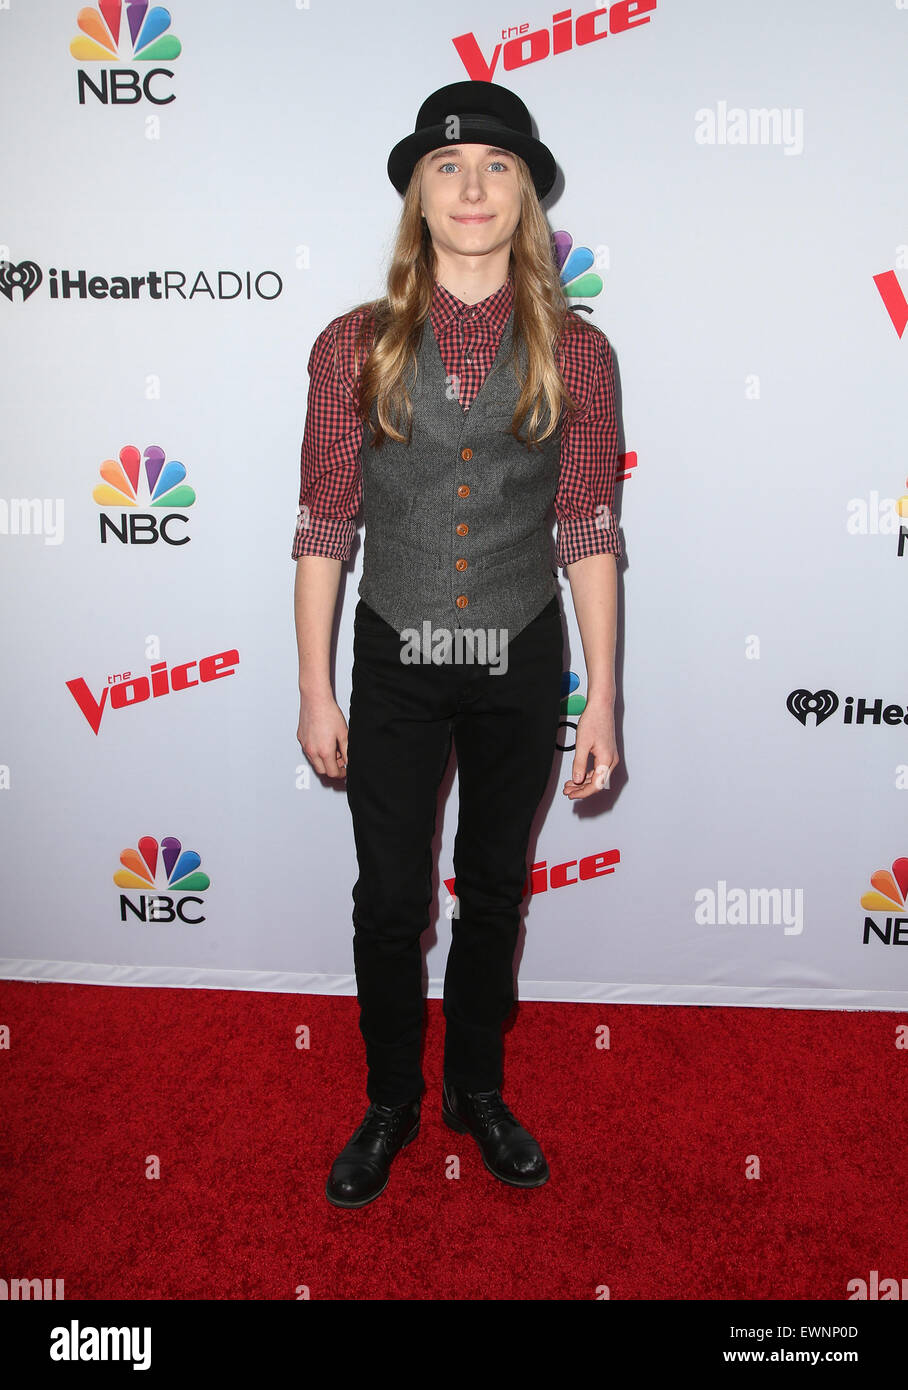 NBC's 'The Voice' Season 8 at Pacific Design Center - Red Carpet Arrivals  Featuring: Sawyer Fredericks Where: West Hollywood, California, United States When: 23 Apr 2015 Stock Photo